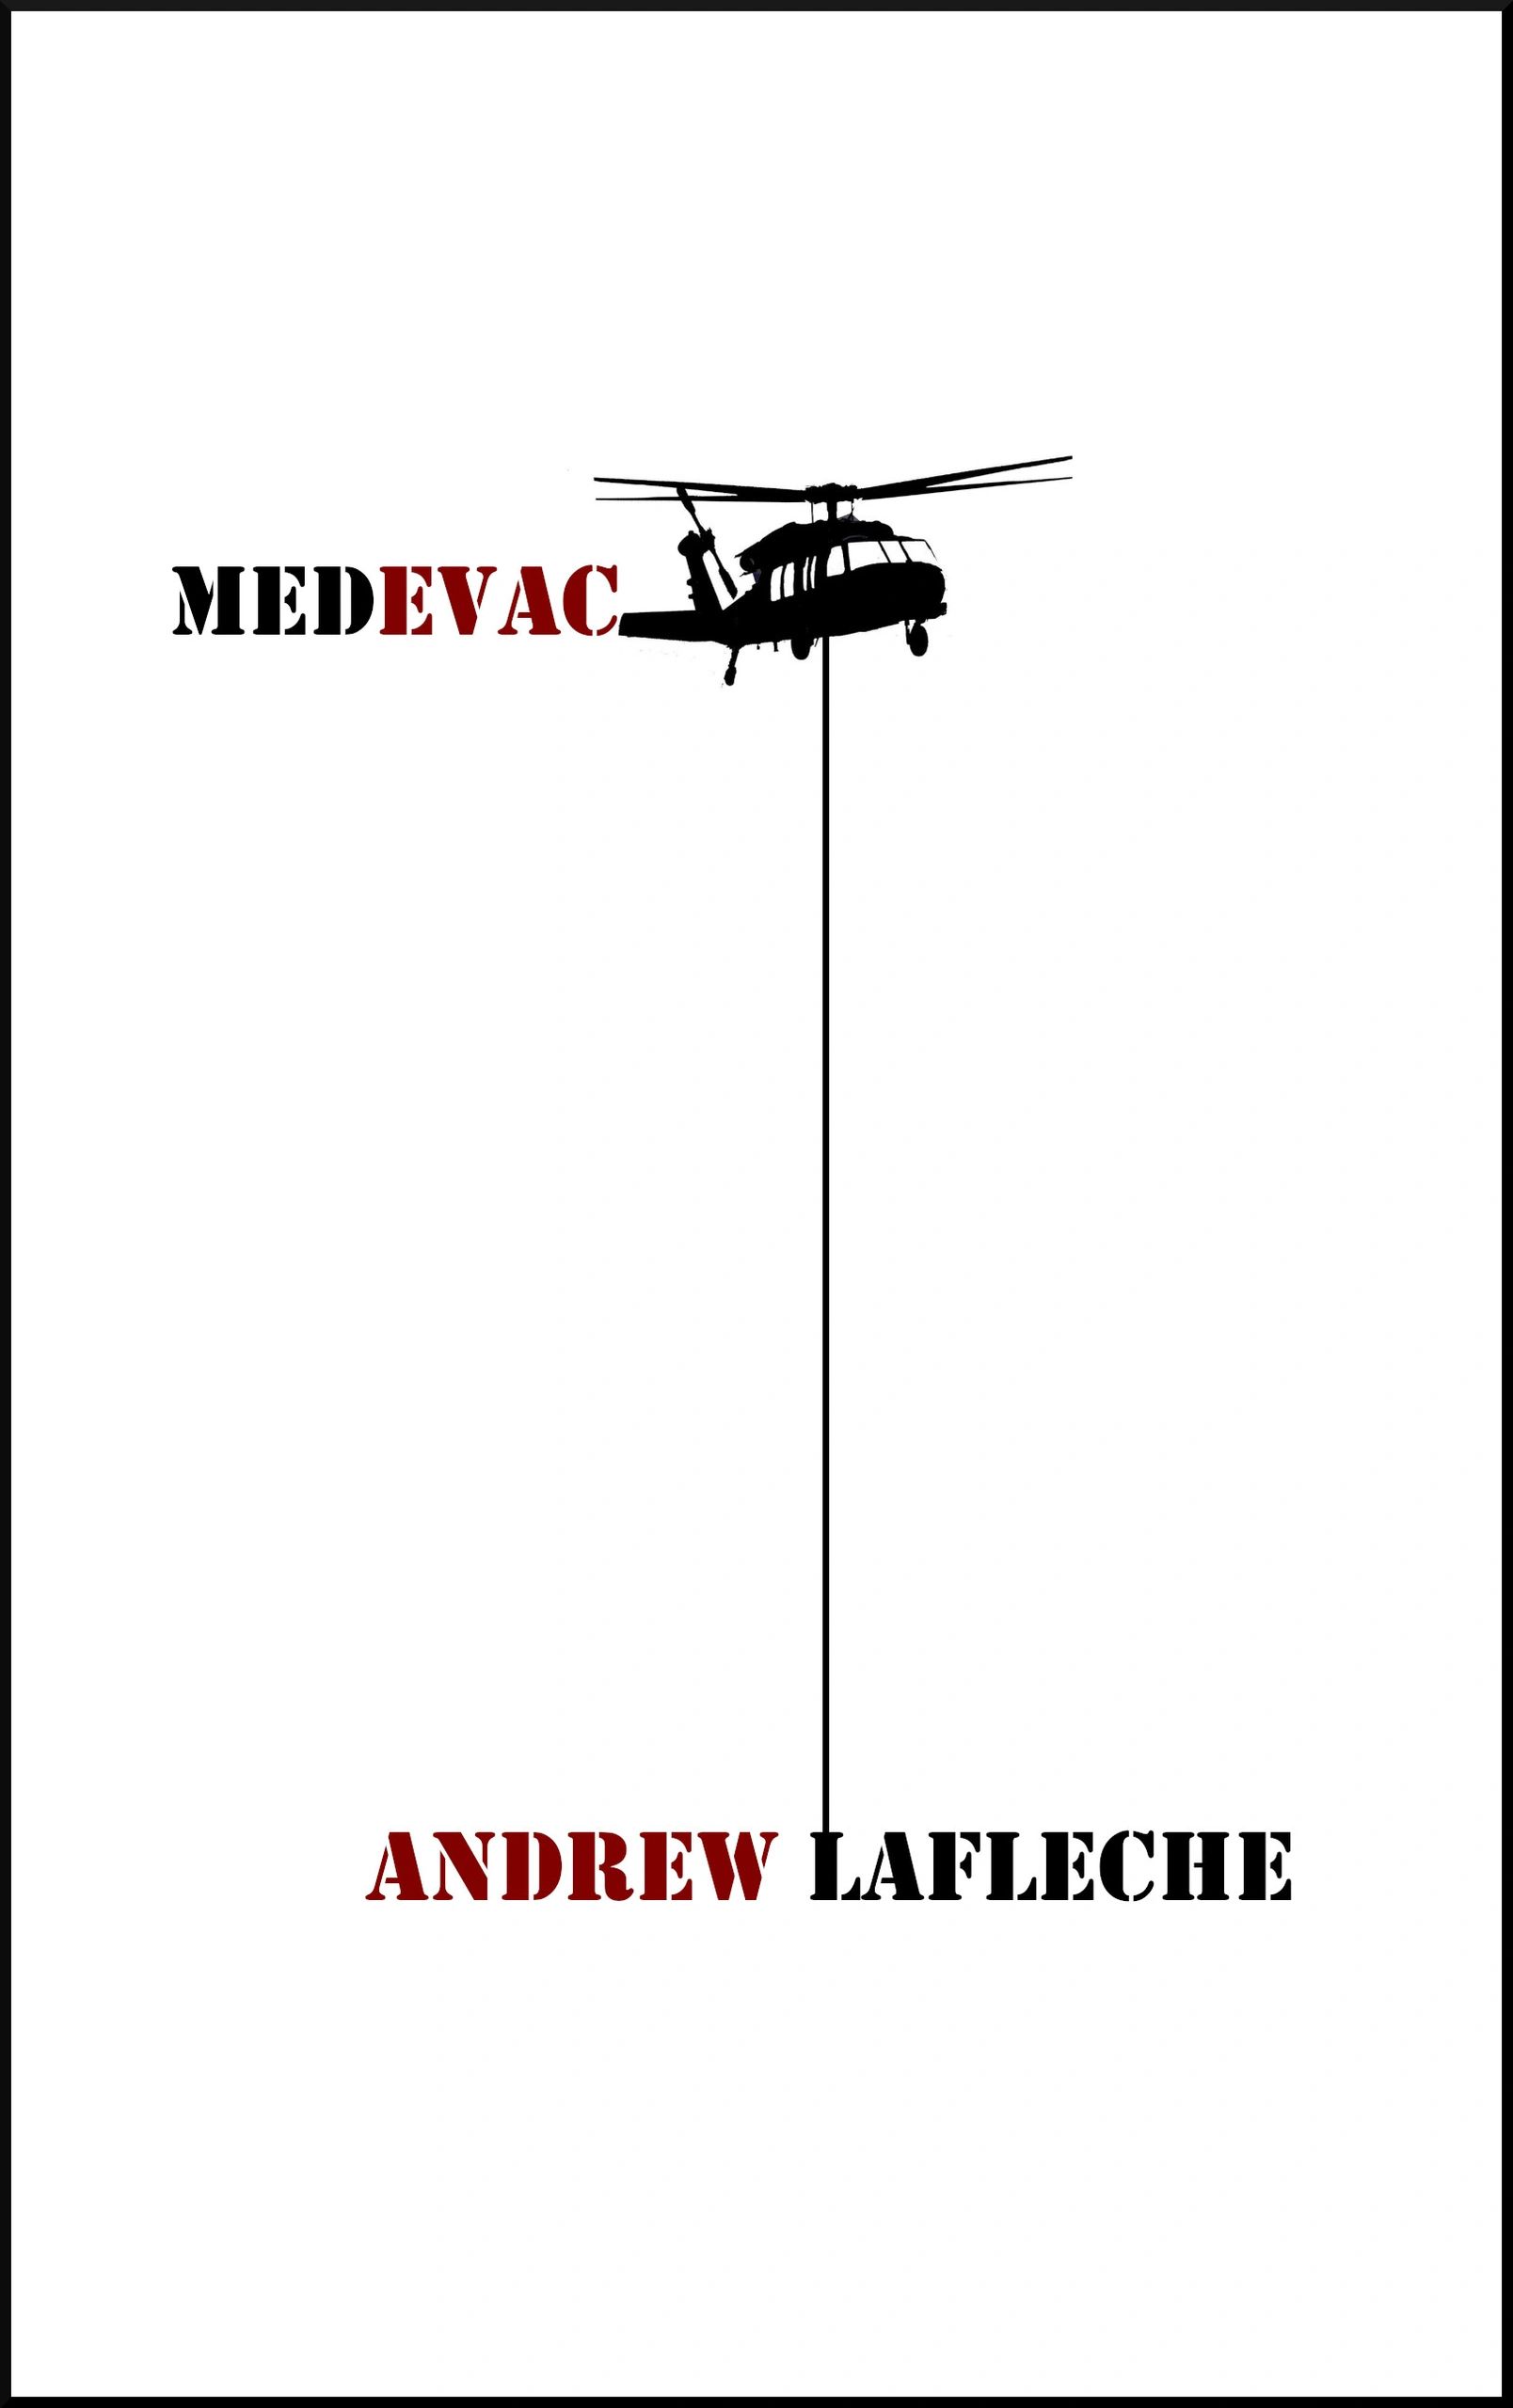 The extraordinarily raw and gut-felt poetry collection, Medevac, by infantry veteran Andrew Lafleche